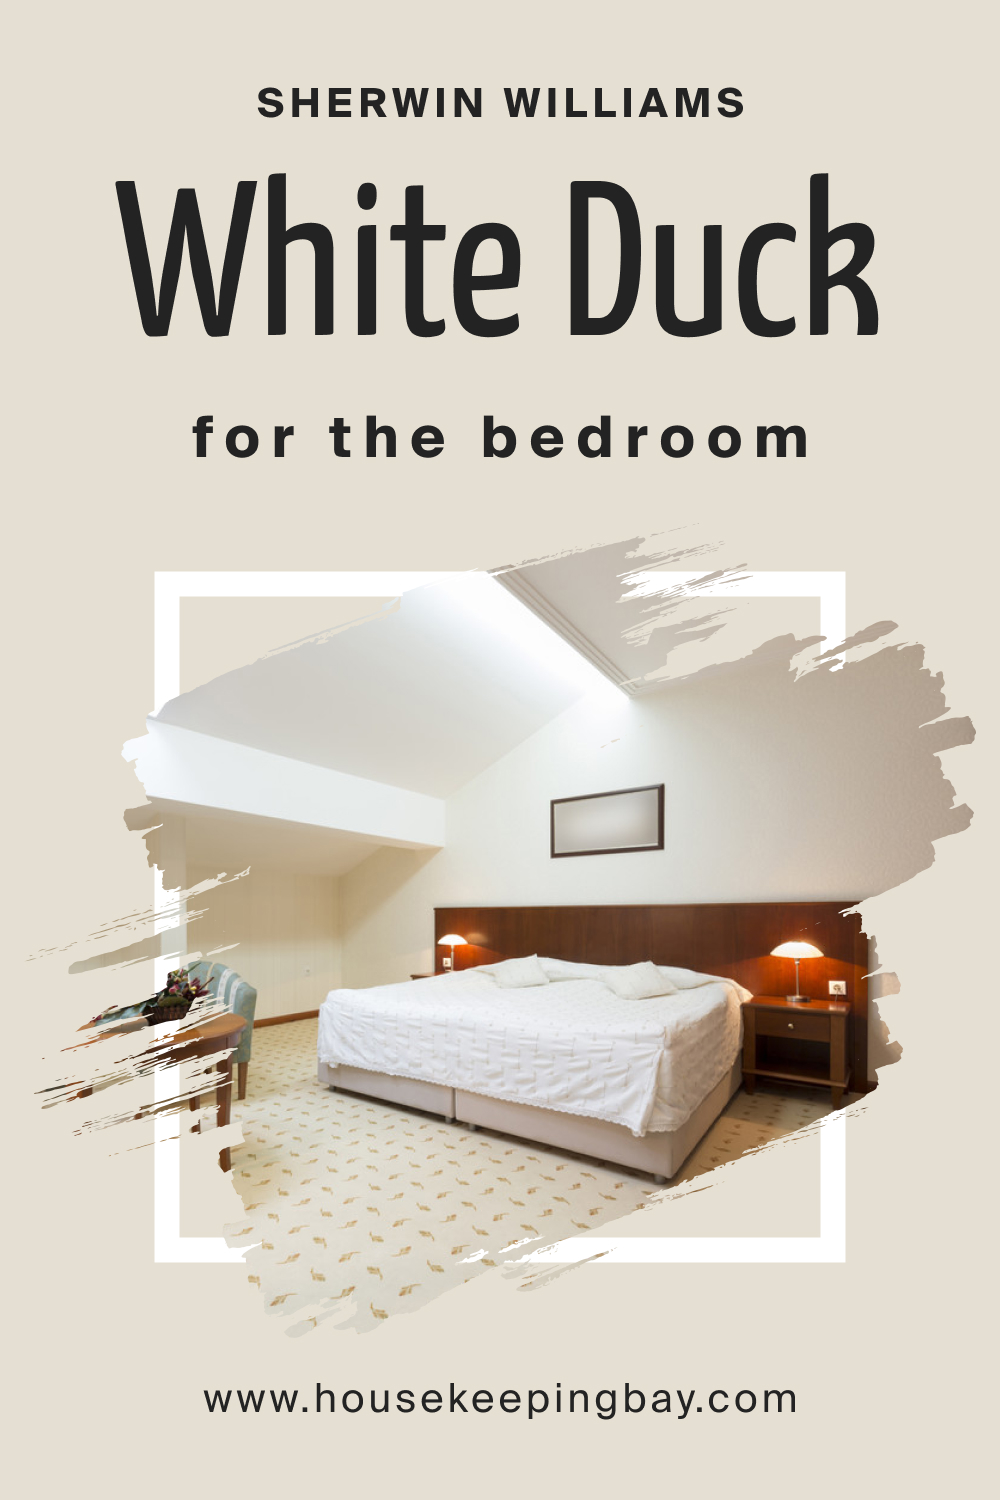 Sherwin Williams. SW White Duck For the bedroom